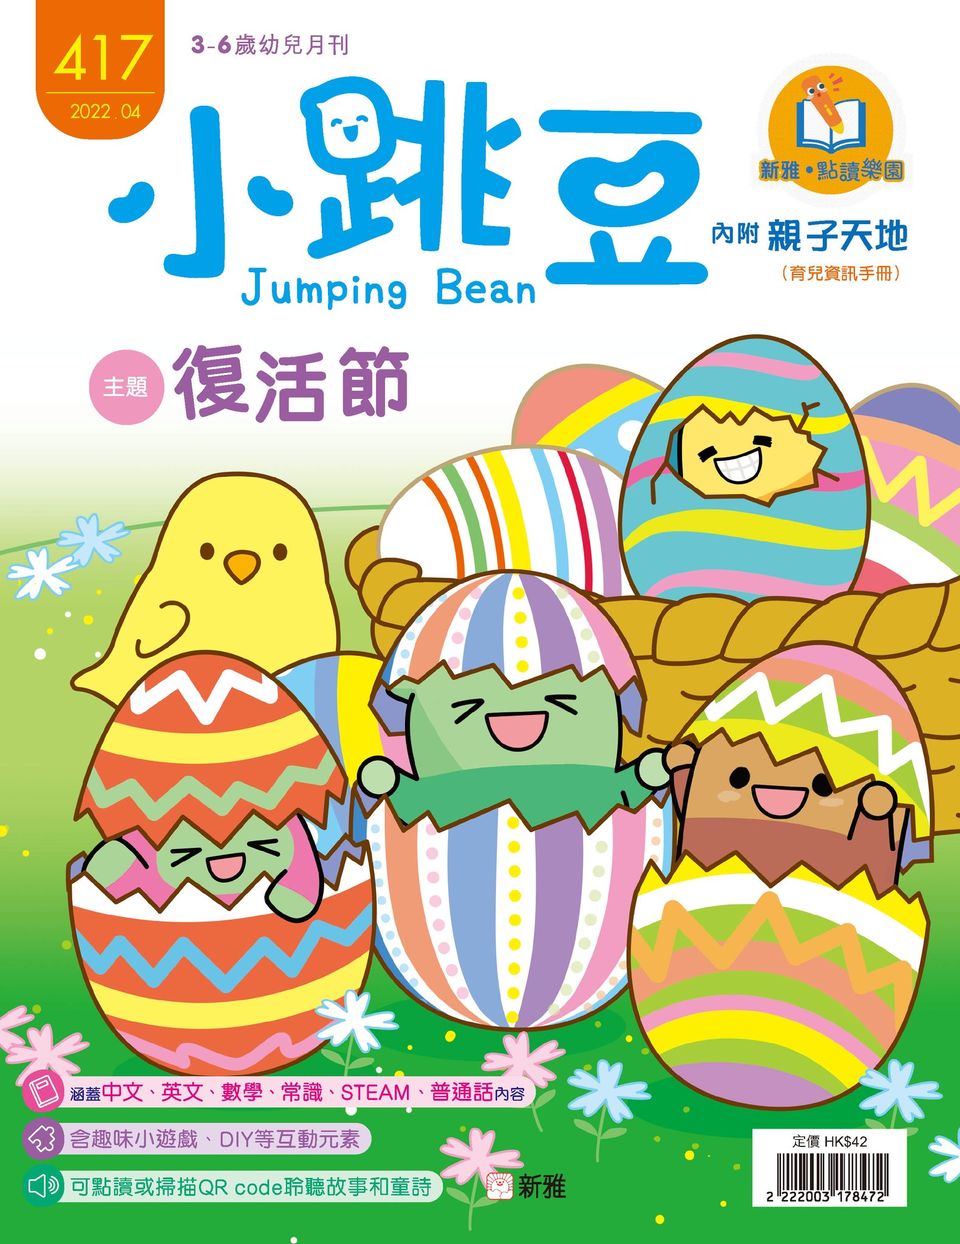 [Sunya Reading Pen] Little Jumping Bean Magazine Issue #417: Easter (+ Story Book: A Hut in the Forest) • 小跳豆幼兒雜誌 417期 復活節 (隨書贈送 繪本《矗立在森林中的小屋》)